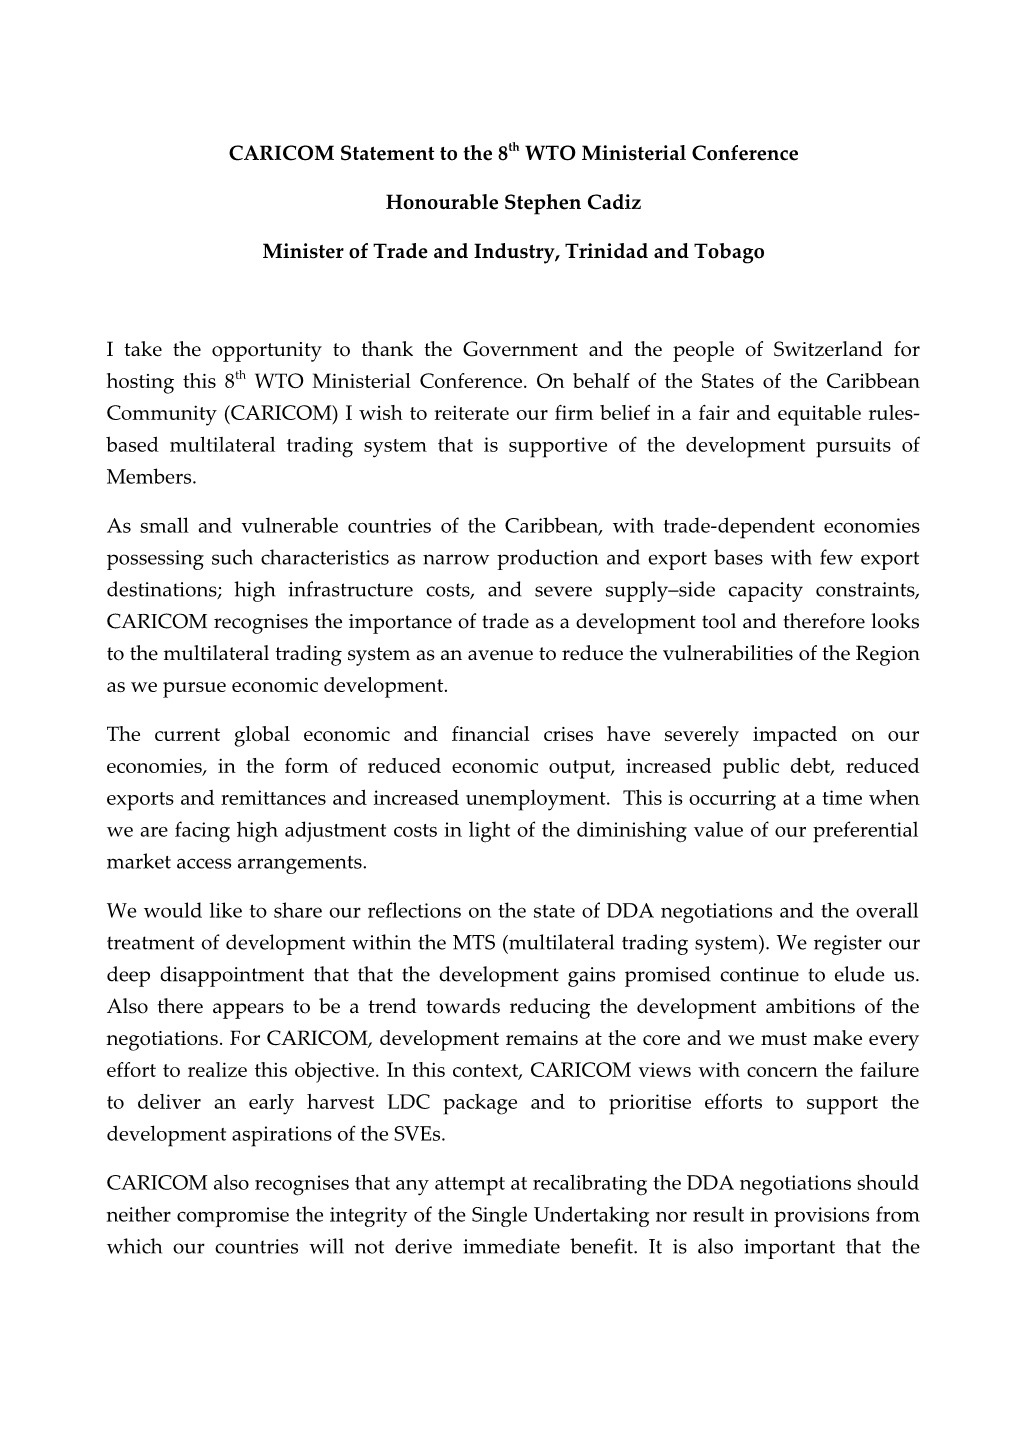 CARICOM Statement to the 8Th WTO Ministerial Conference